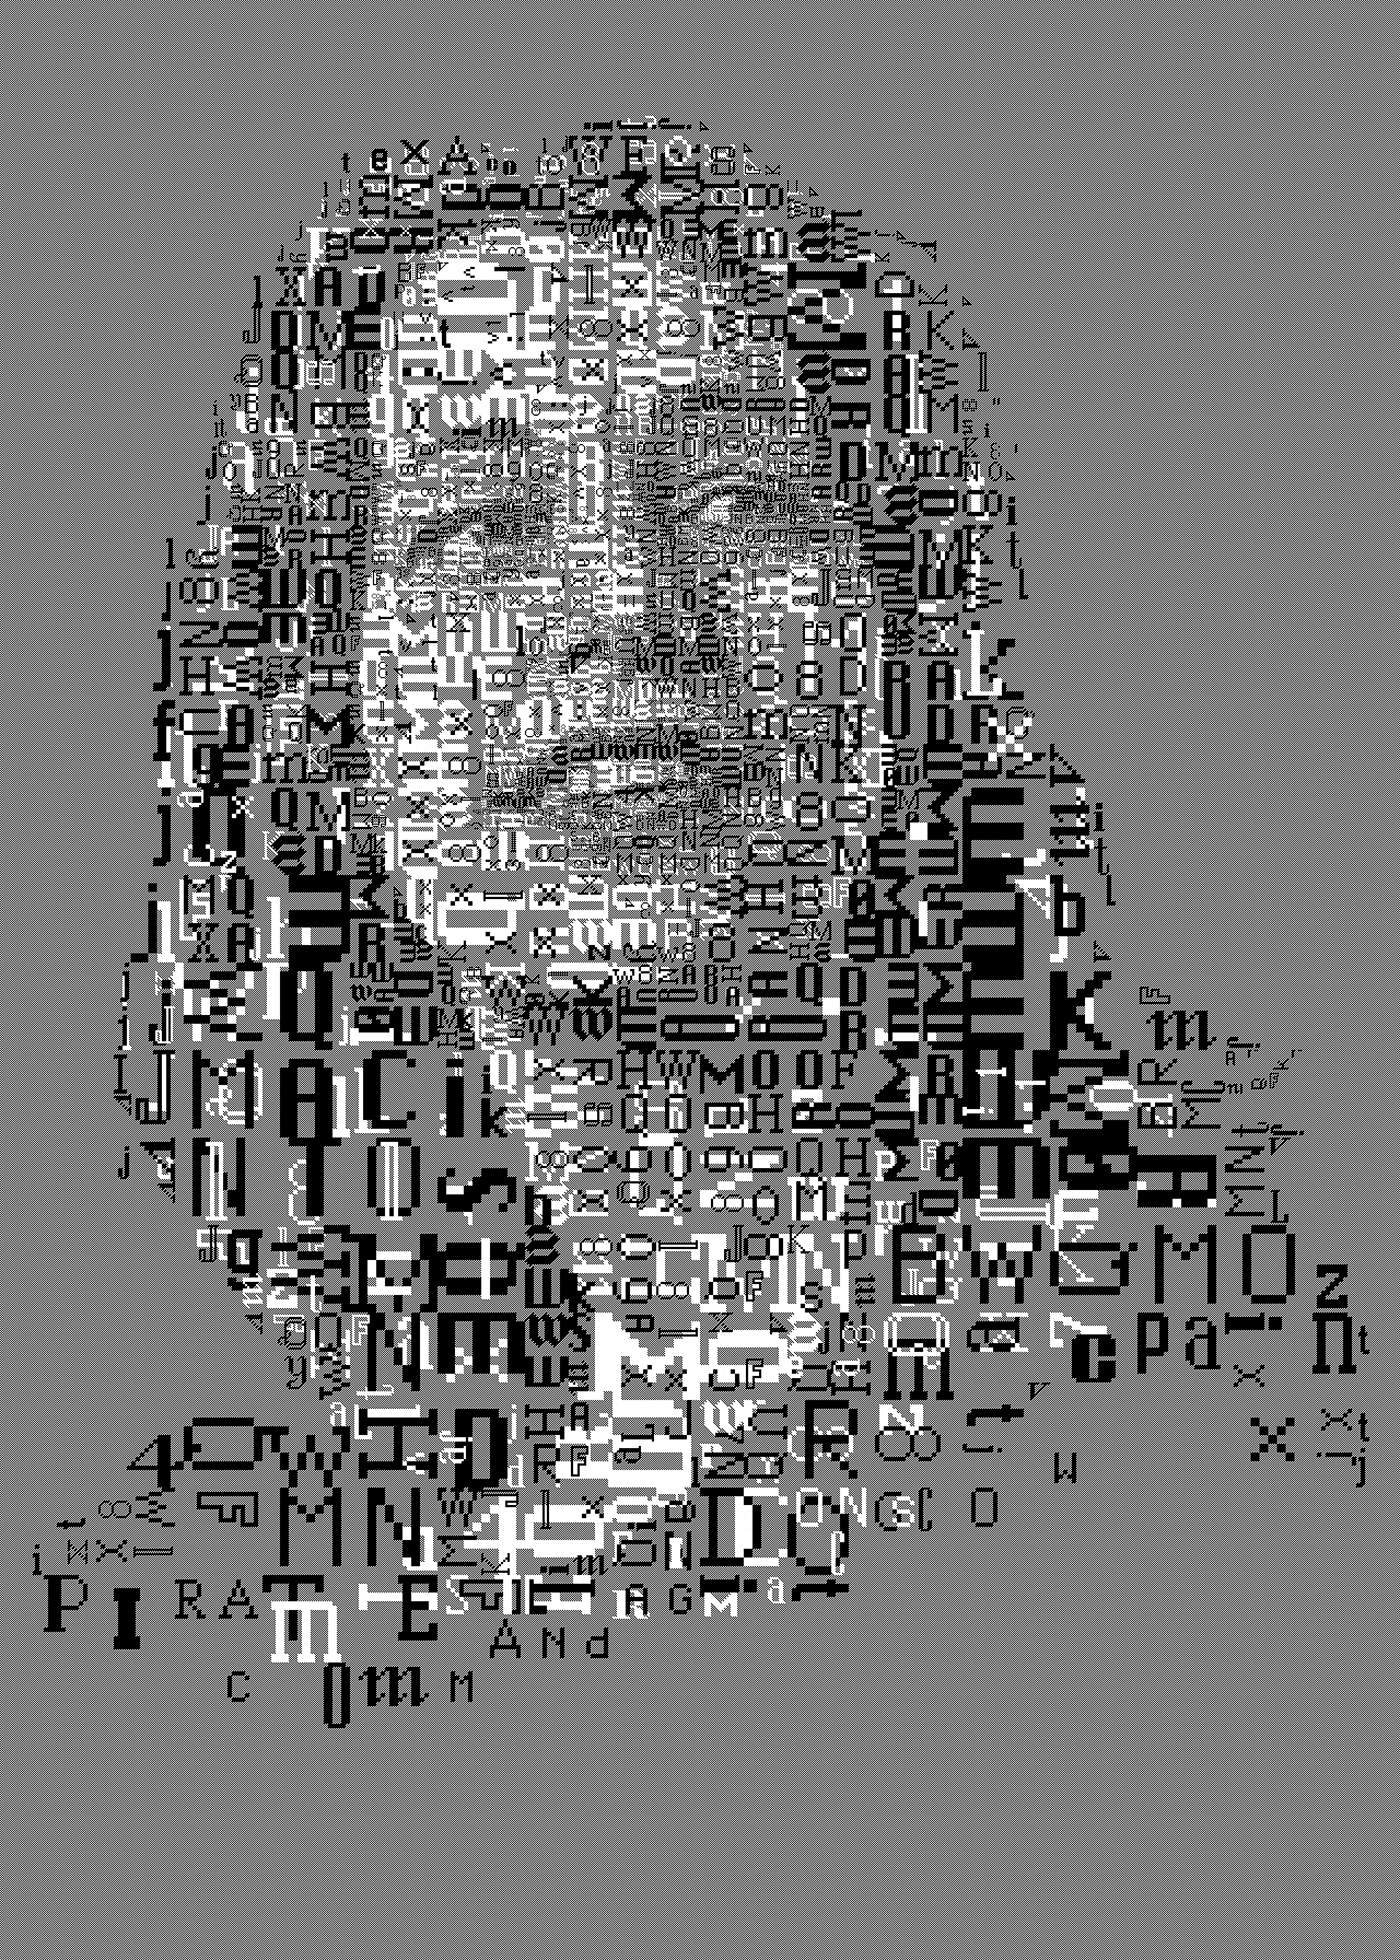 photomosaic Steve Jobs apple Macintosh lettering posters fonts History of computing cyberculture 80s black and white